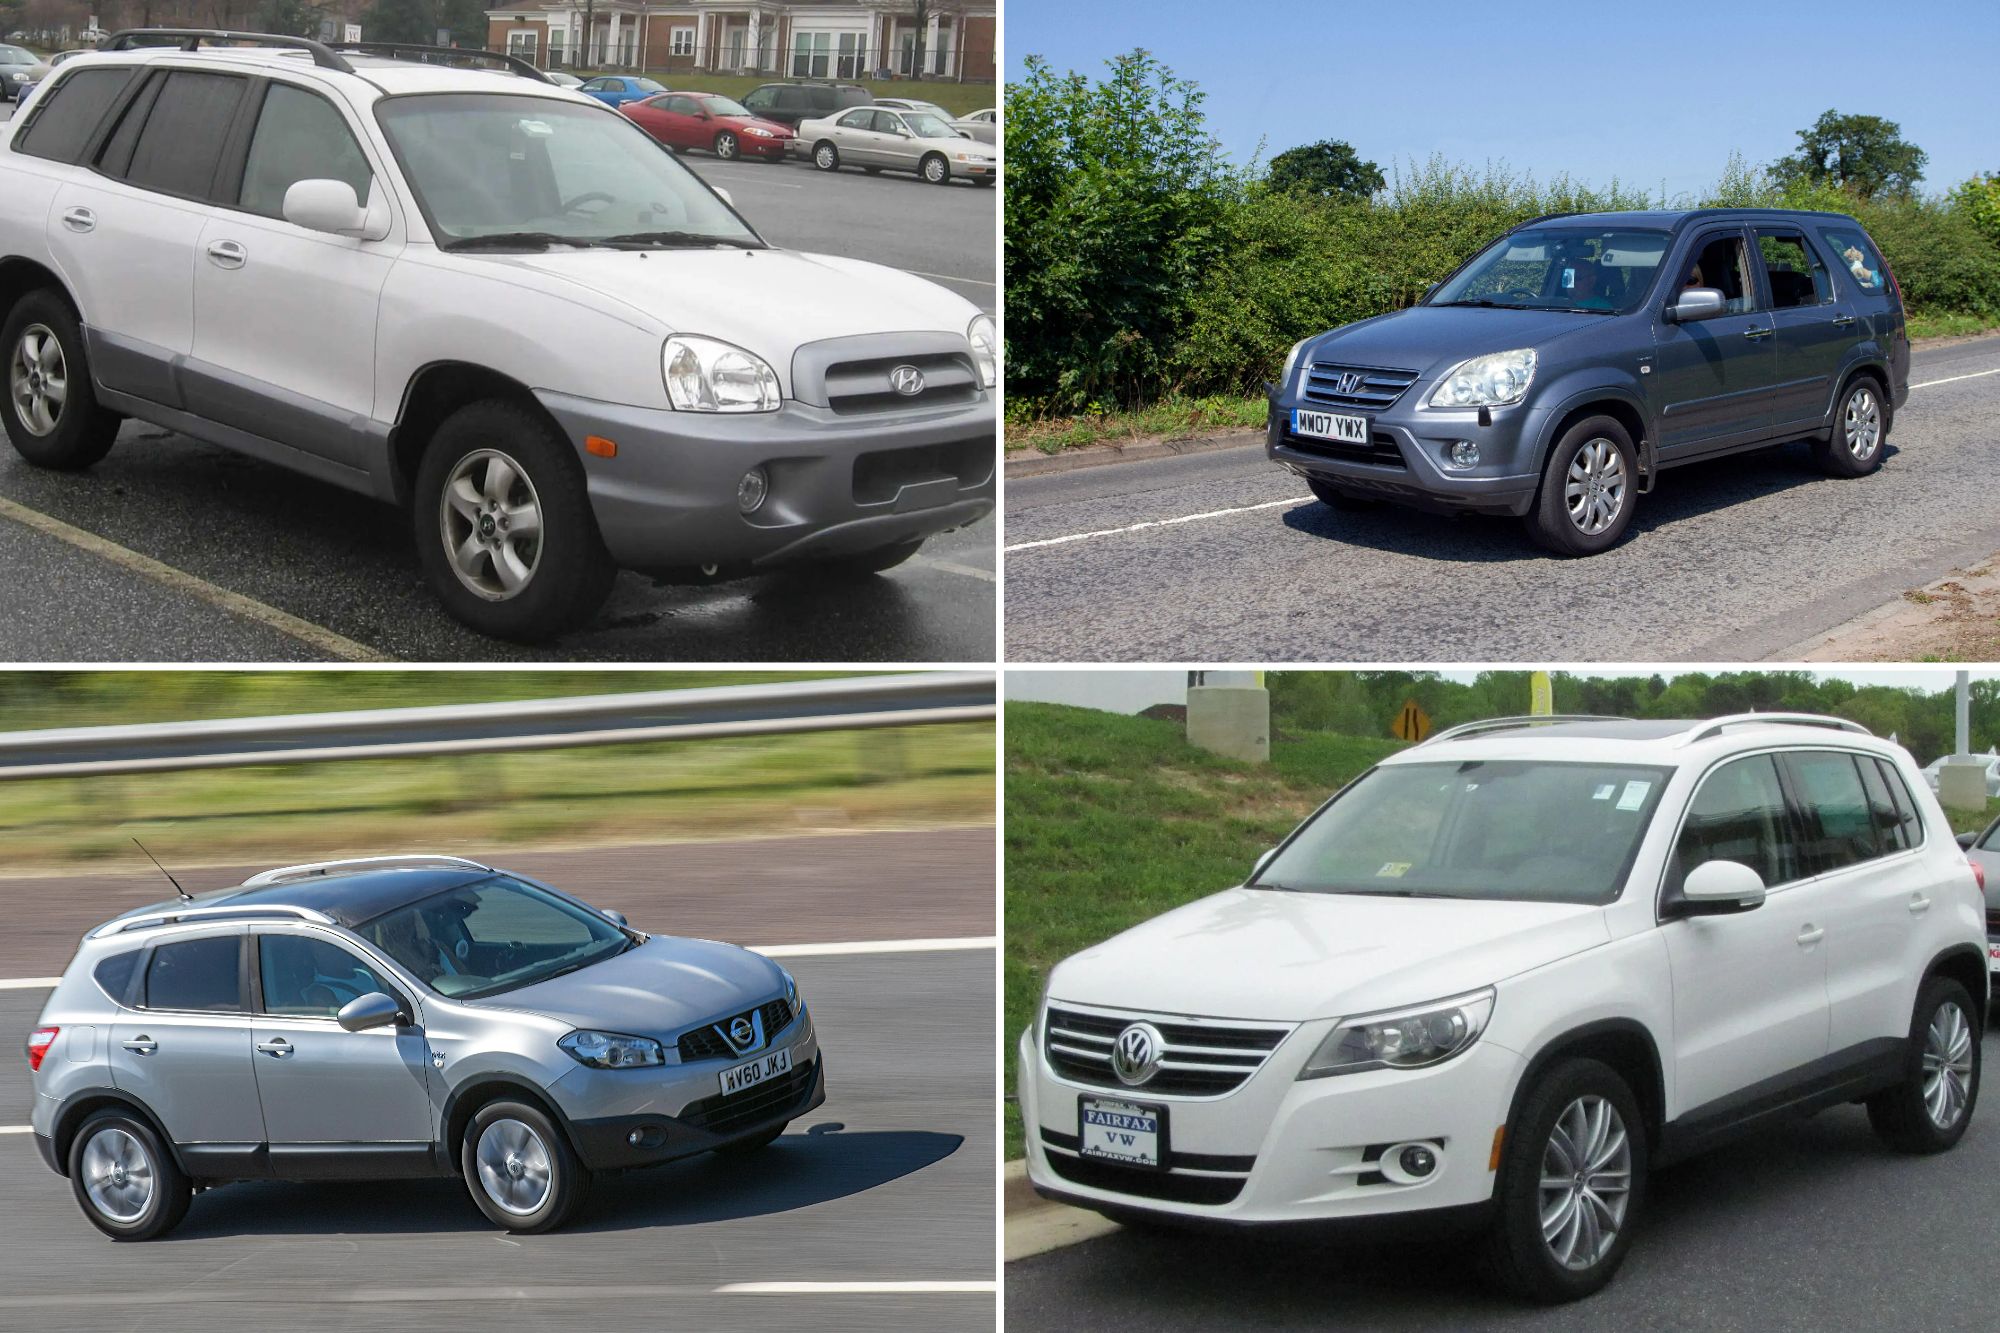 A motors expert has shared the best SUVs you can buy for under £5,000